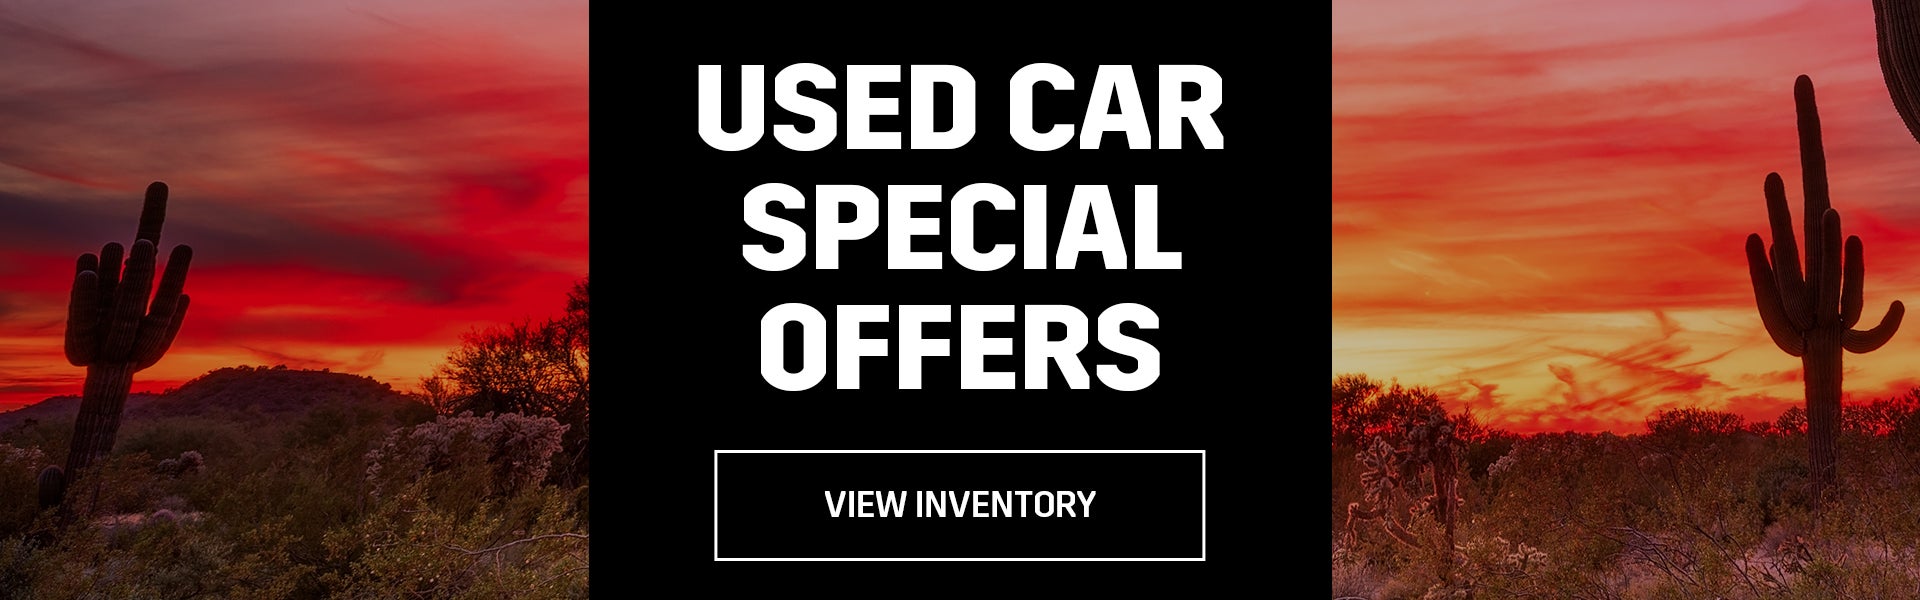 No Bull Used Car Special Offers